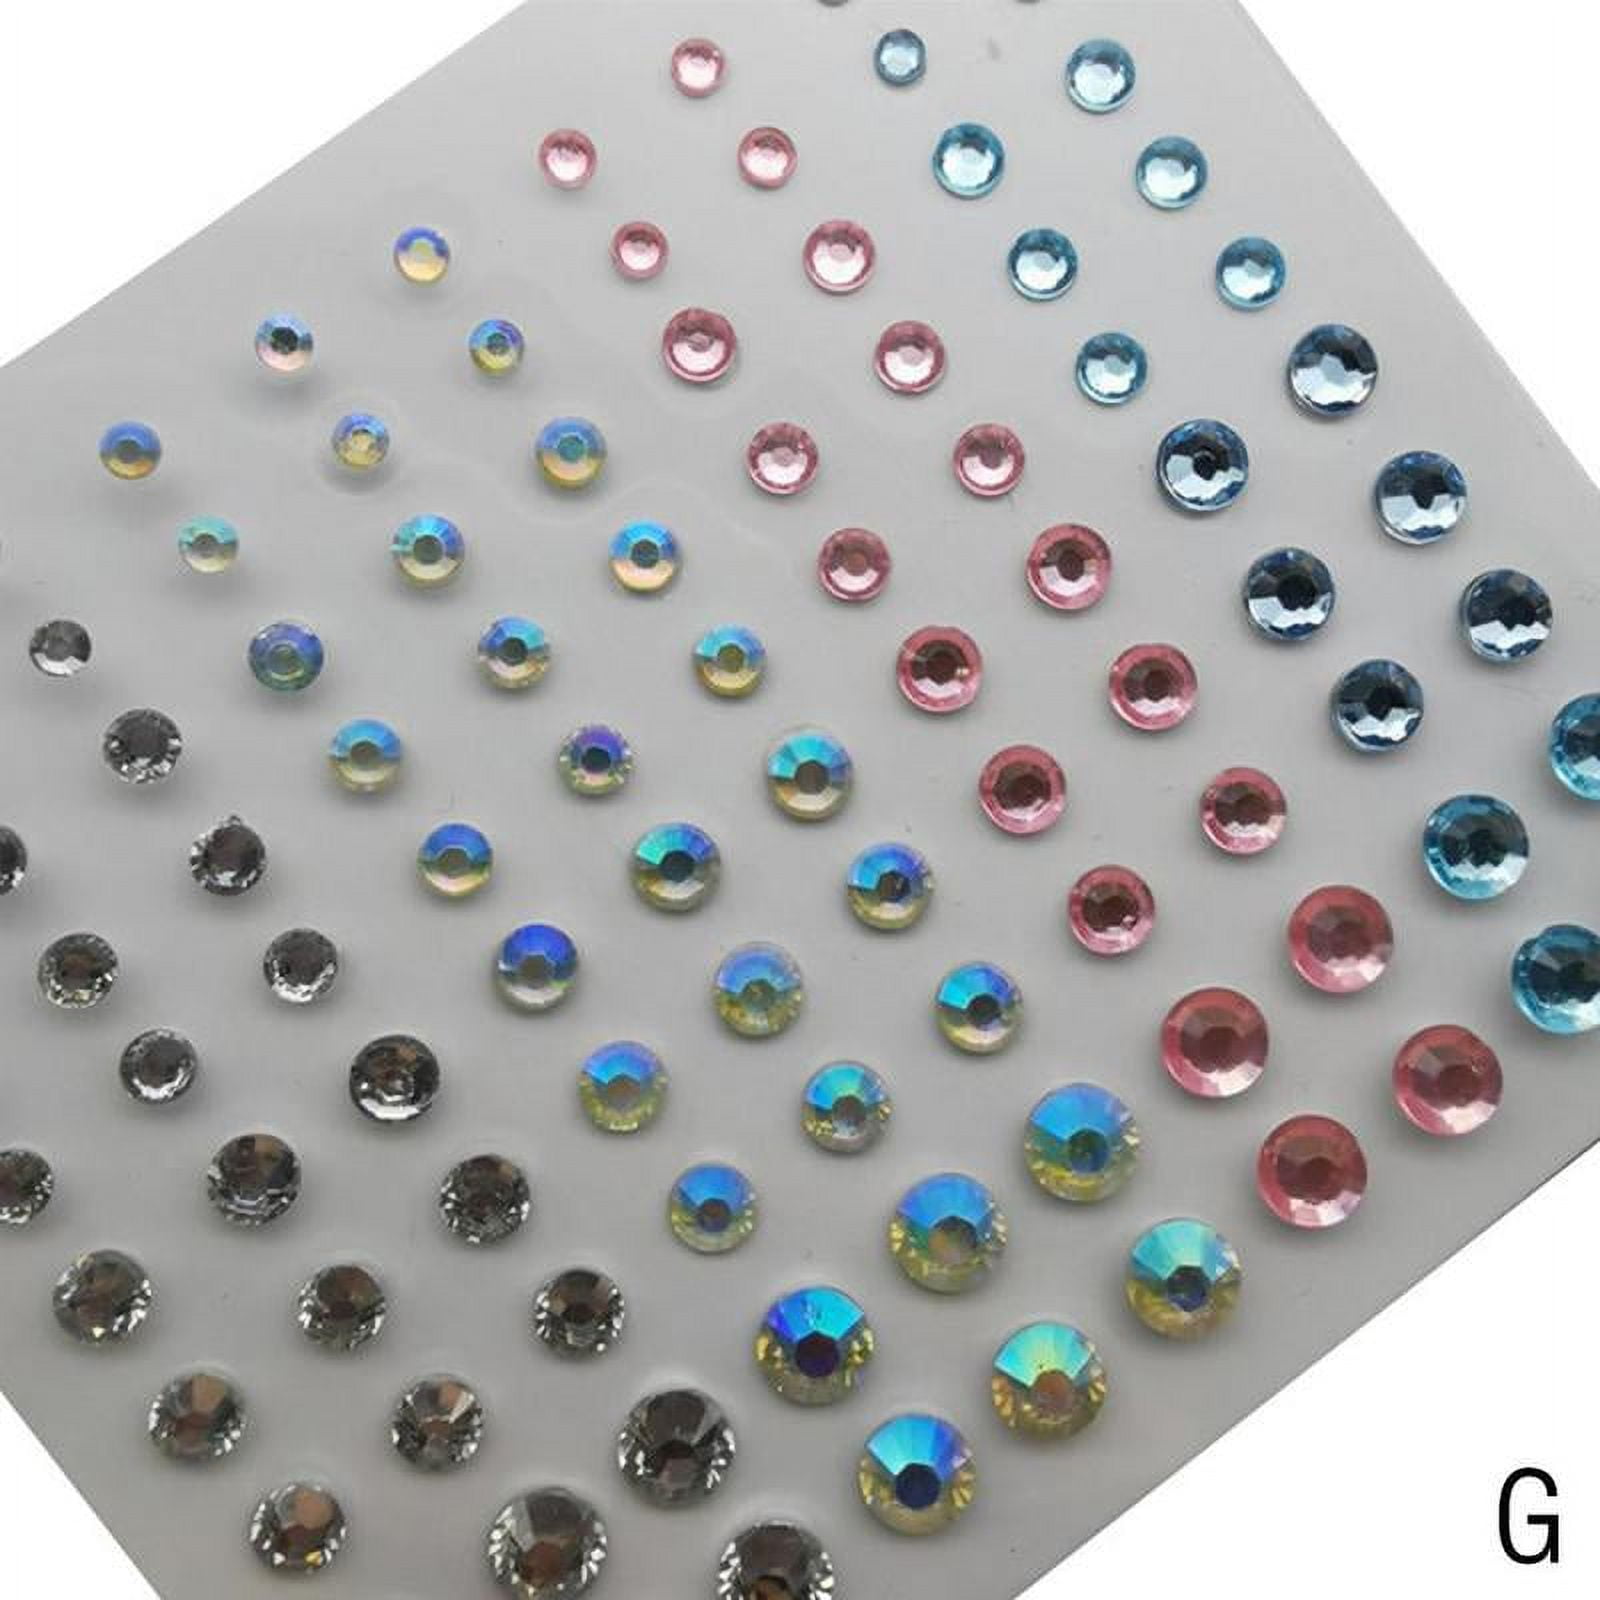 Dropship 9 Sheets Face Gems Heart Round Rhinestone Stickers Self Adhesive  Makeup Jewels to Sell Online at a Lower Price